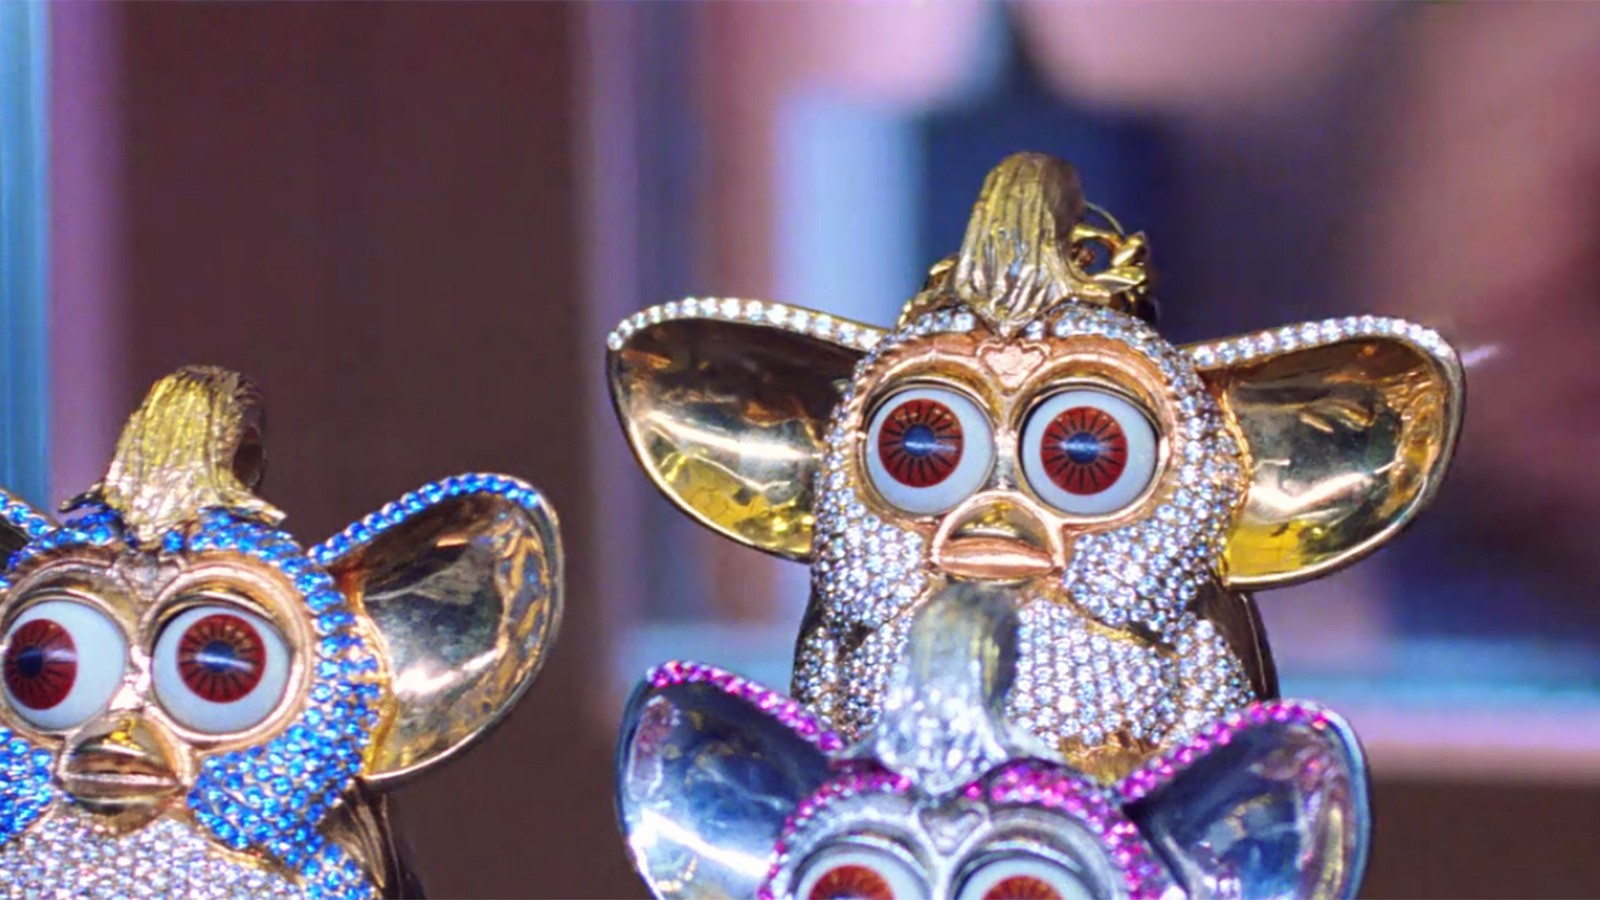 Uncut Gems Bedazzled Furby: A History